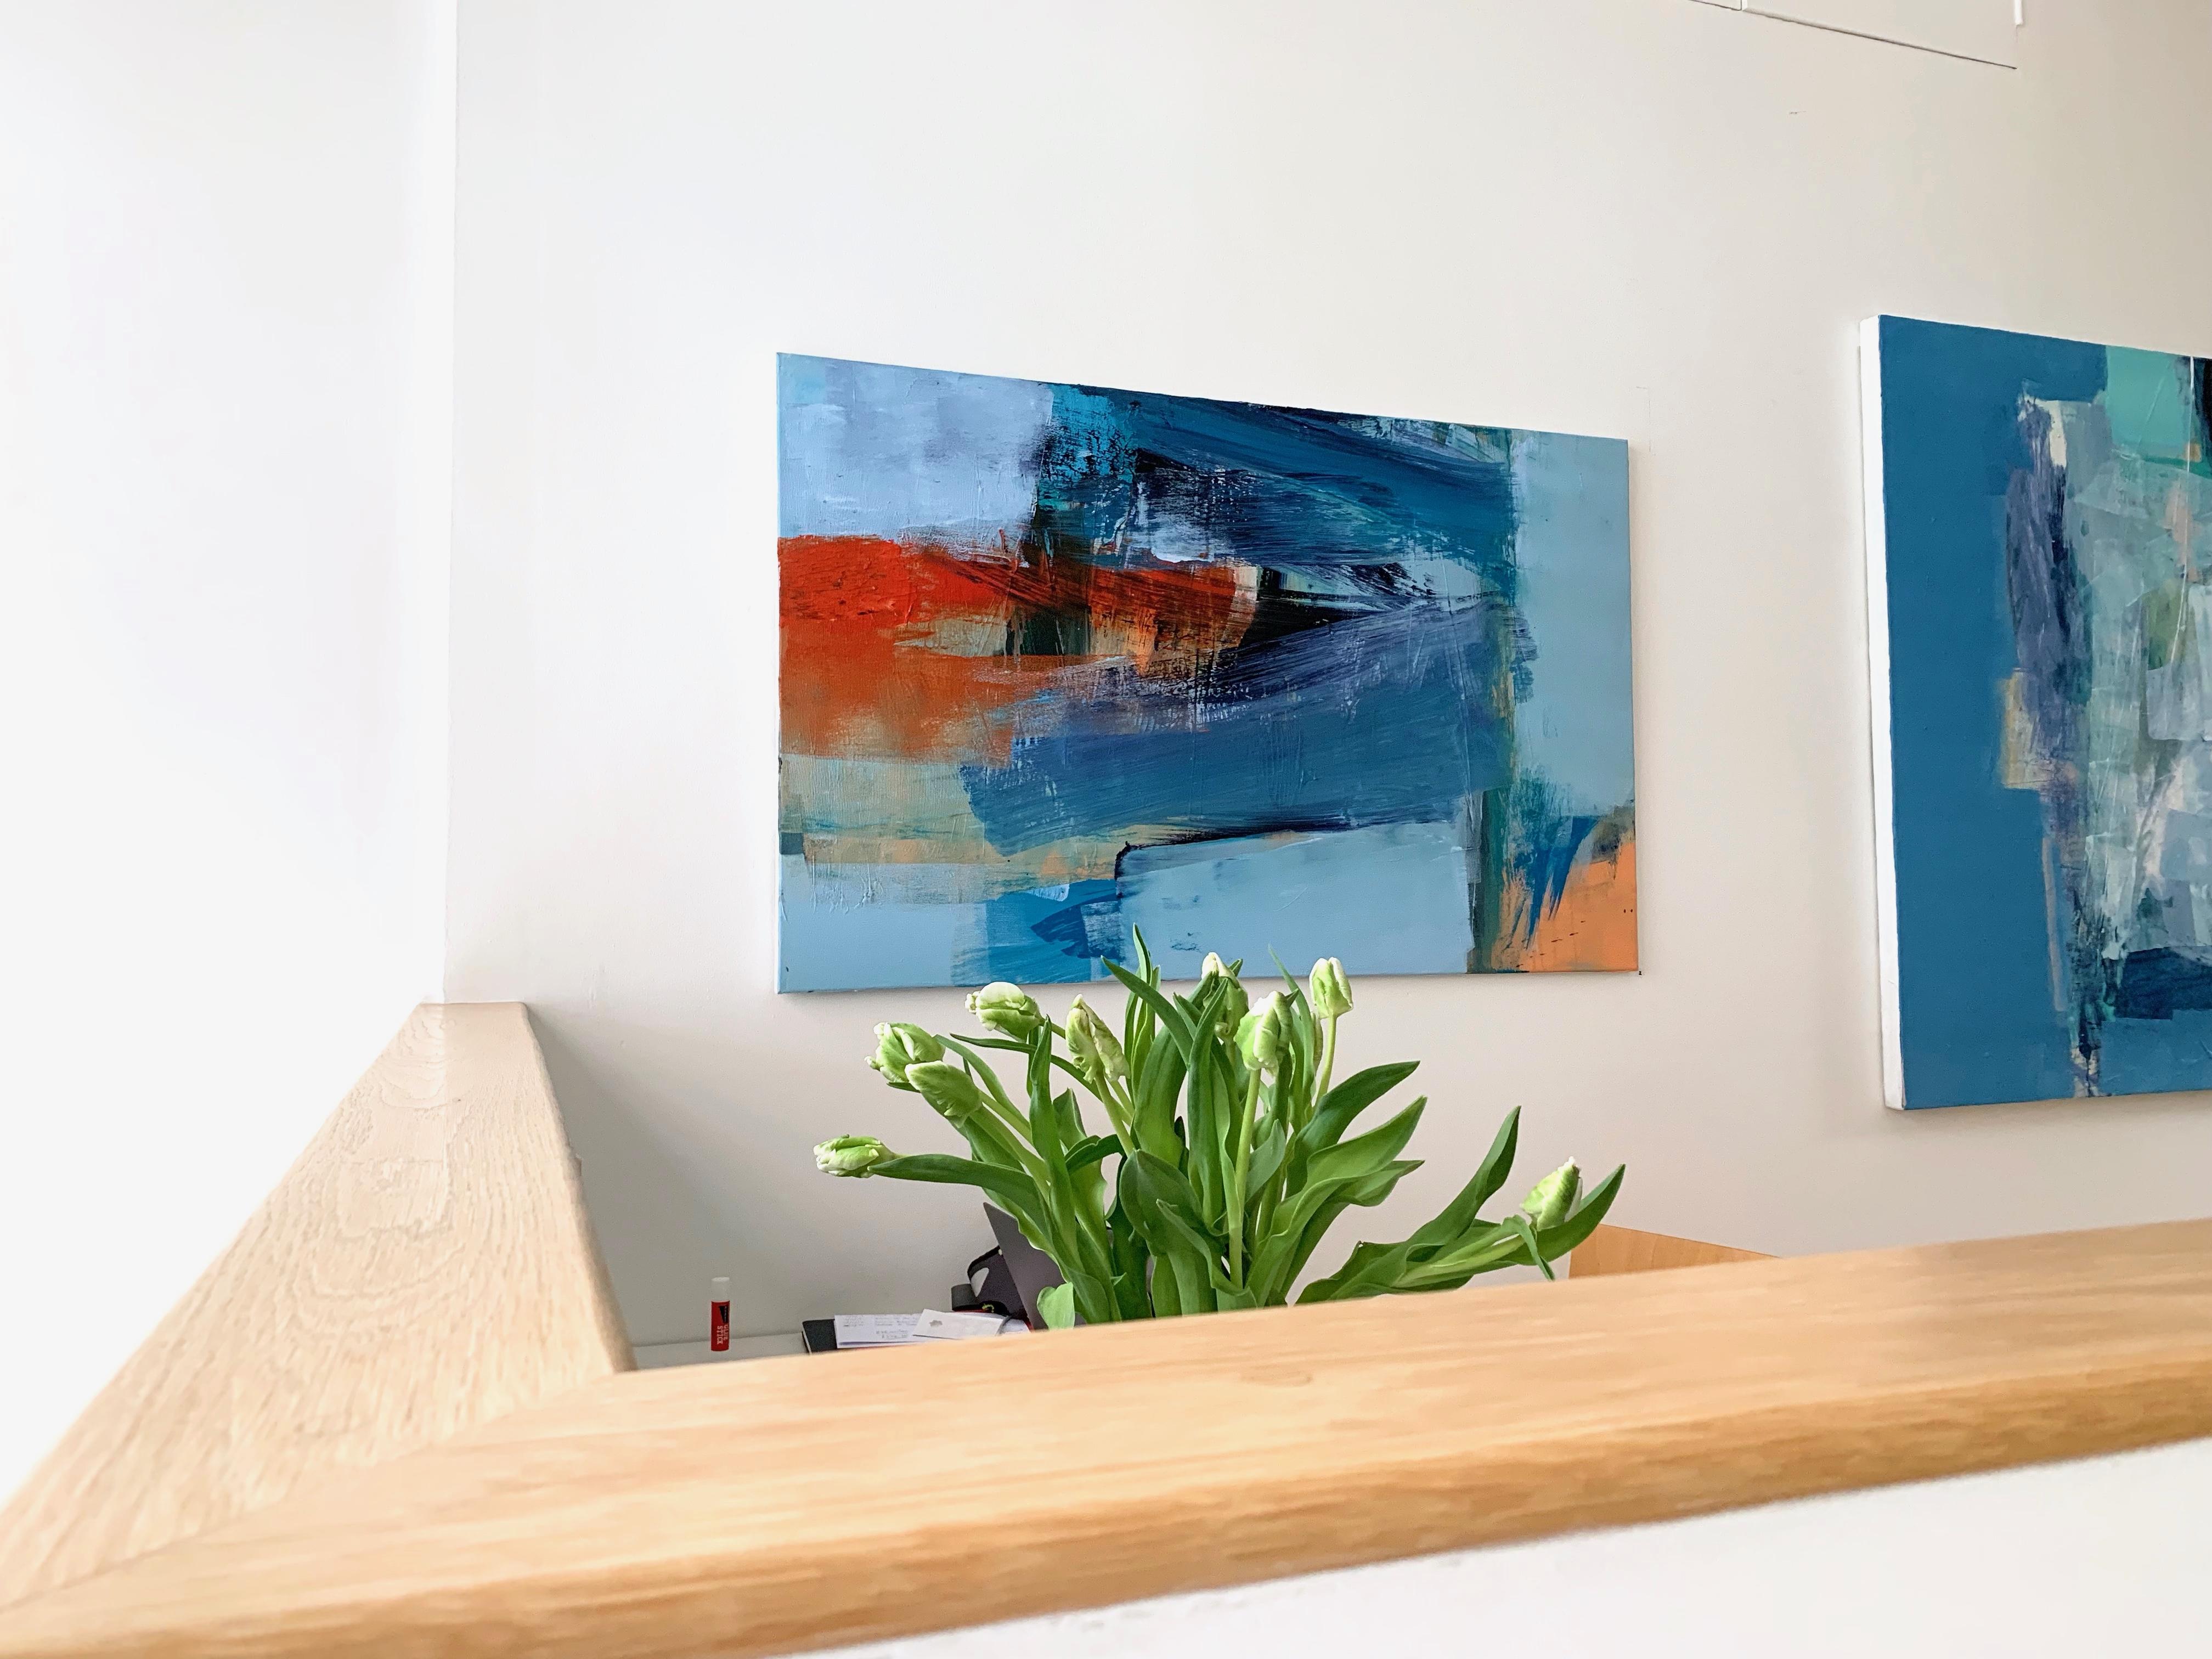 This is one of Deborah’s vibrant and energetic works on canvas, painted on the floor and wall, using her whole body.  Deborah Lanyon's large abstract paintings come from a generation of artists, mostly men, including John Hoyland, Frank Bowling,